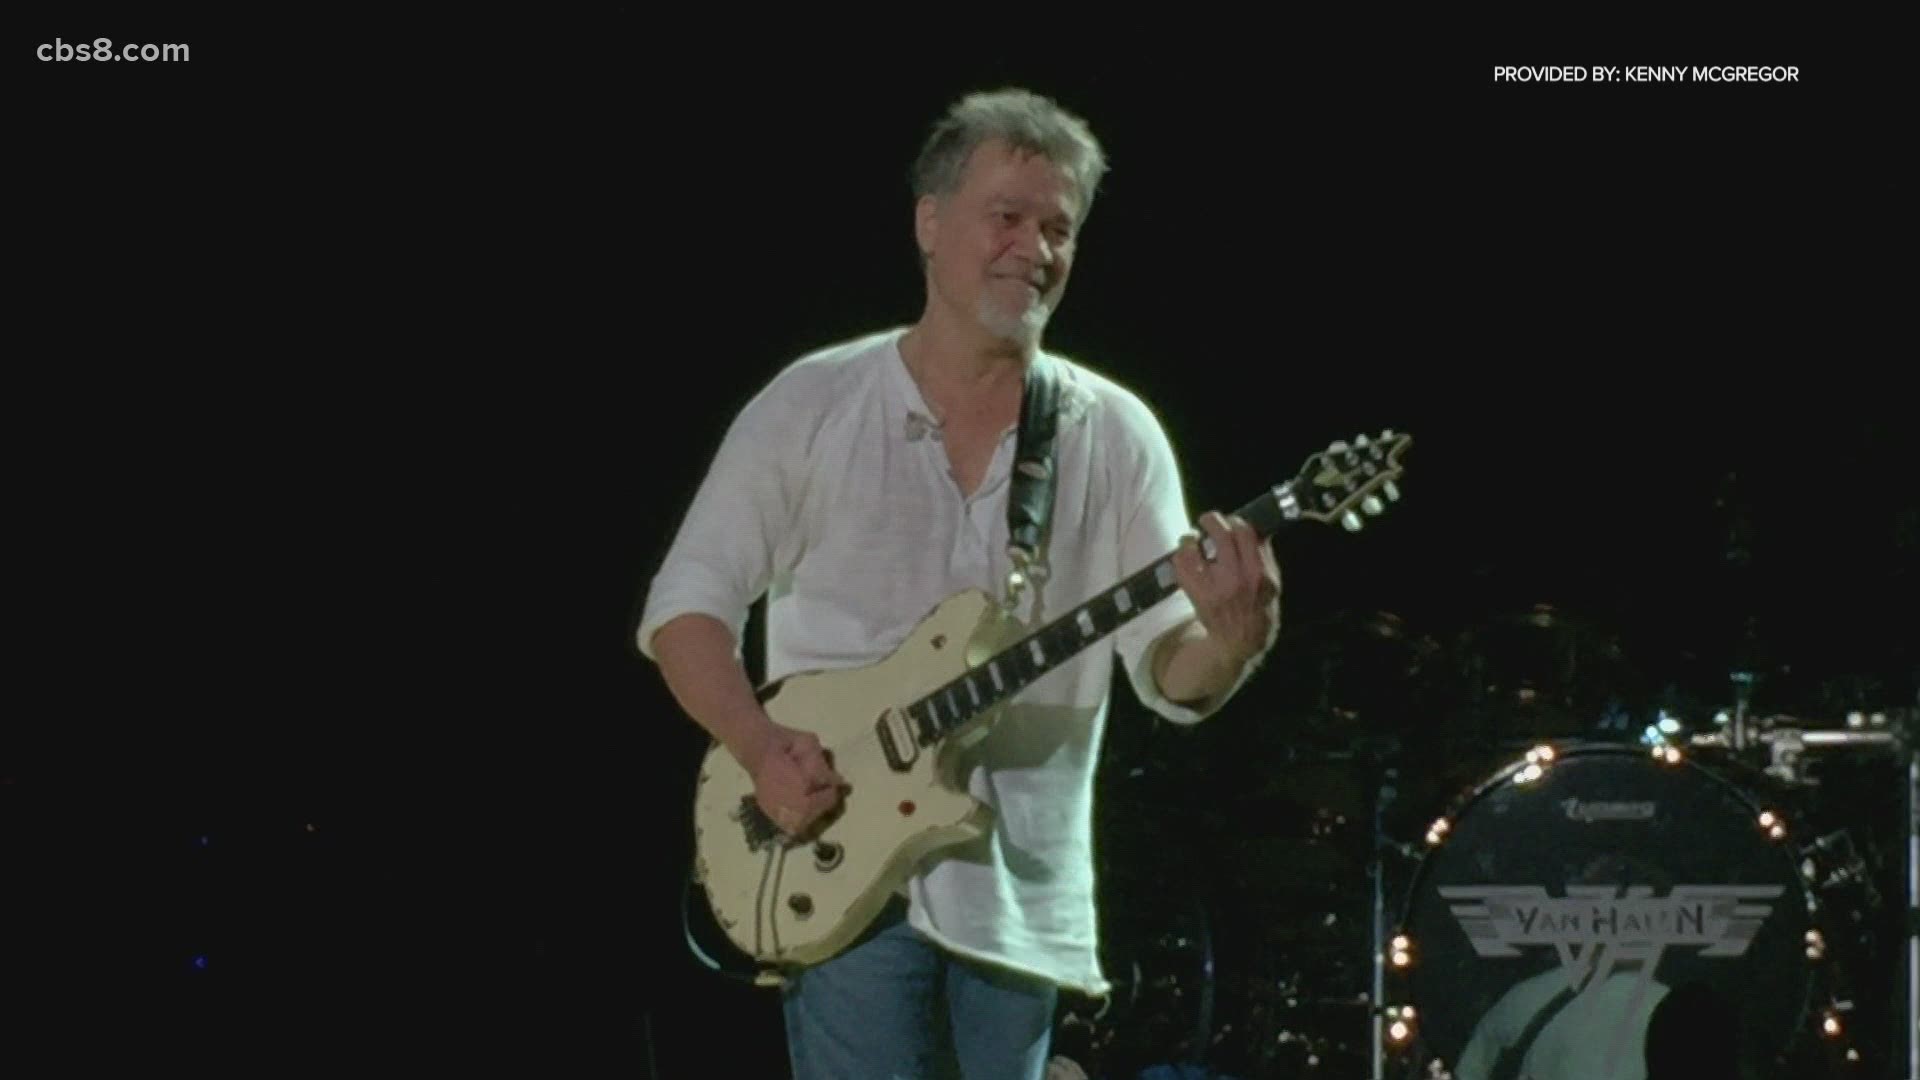 Eddie Van Halen was described by locals as "a very bright, thoughtful guy," "a gentle soul" and "a genuine magical person."